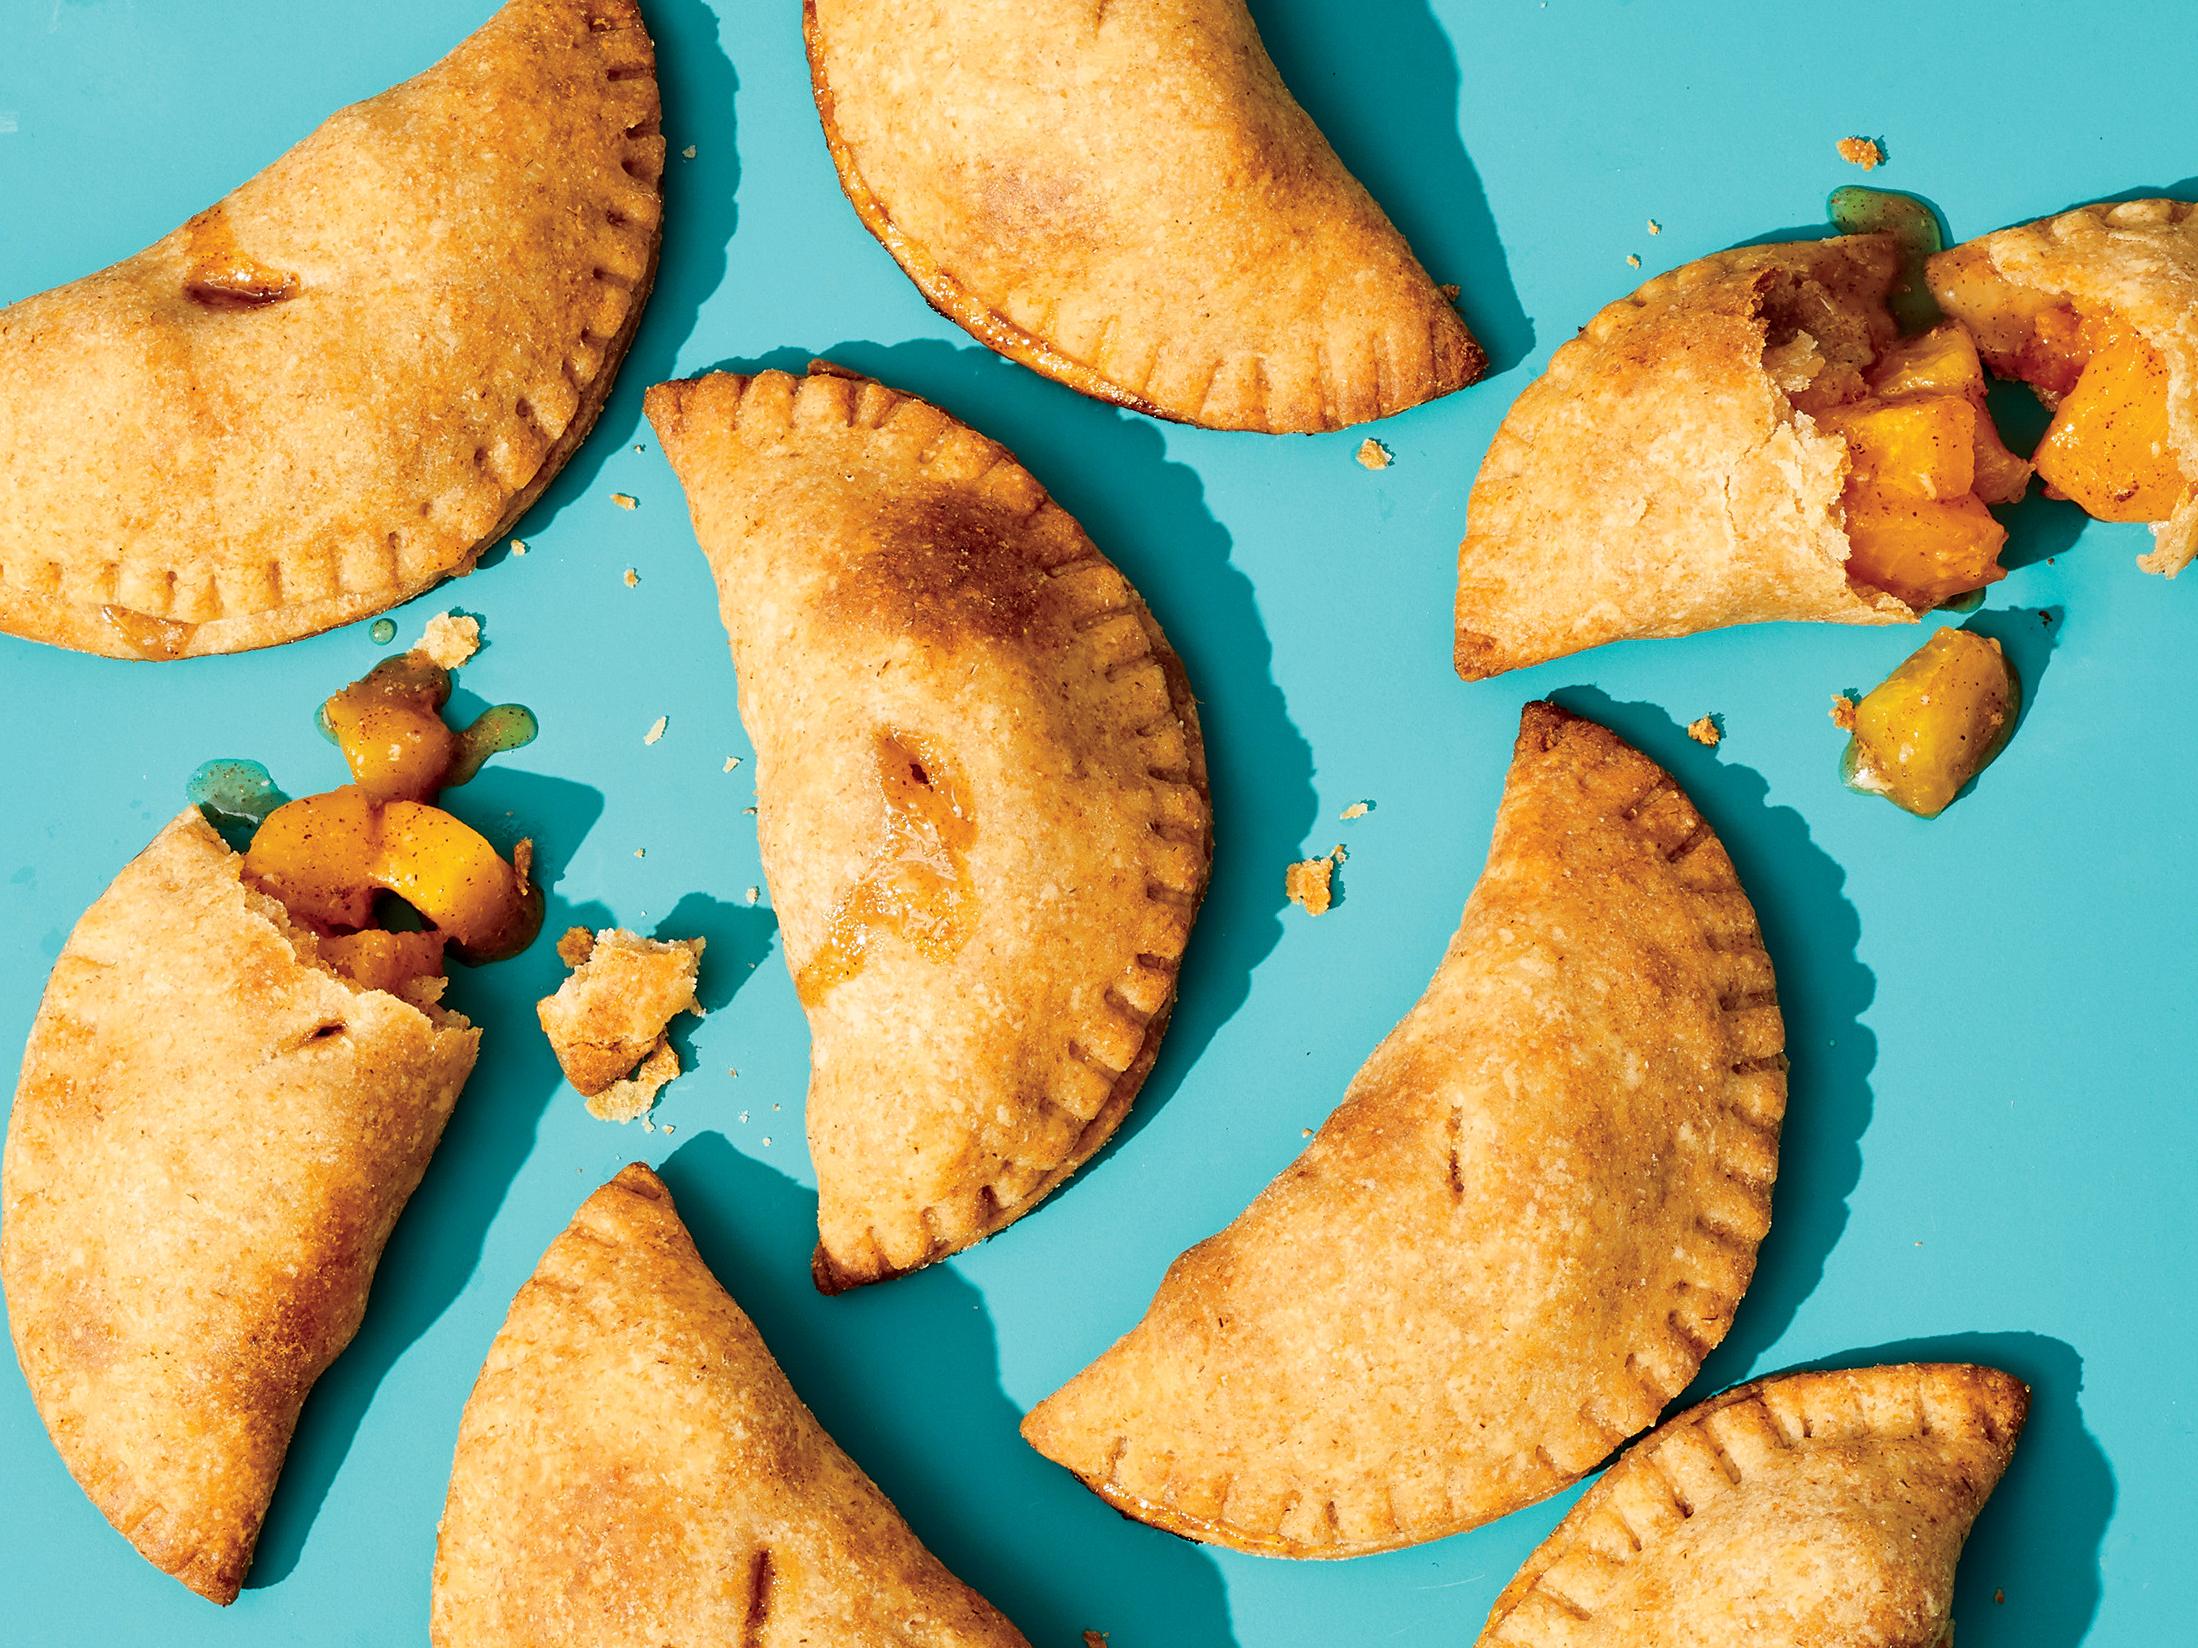  The perfect balance of sweet and nutty flavors make these empanadas truly irresistible.